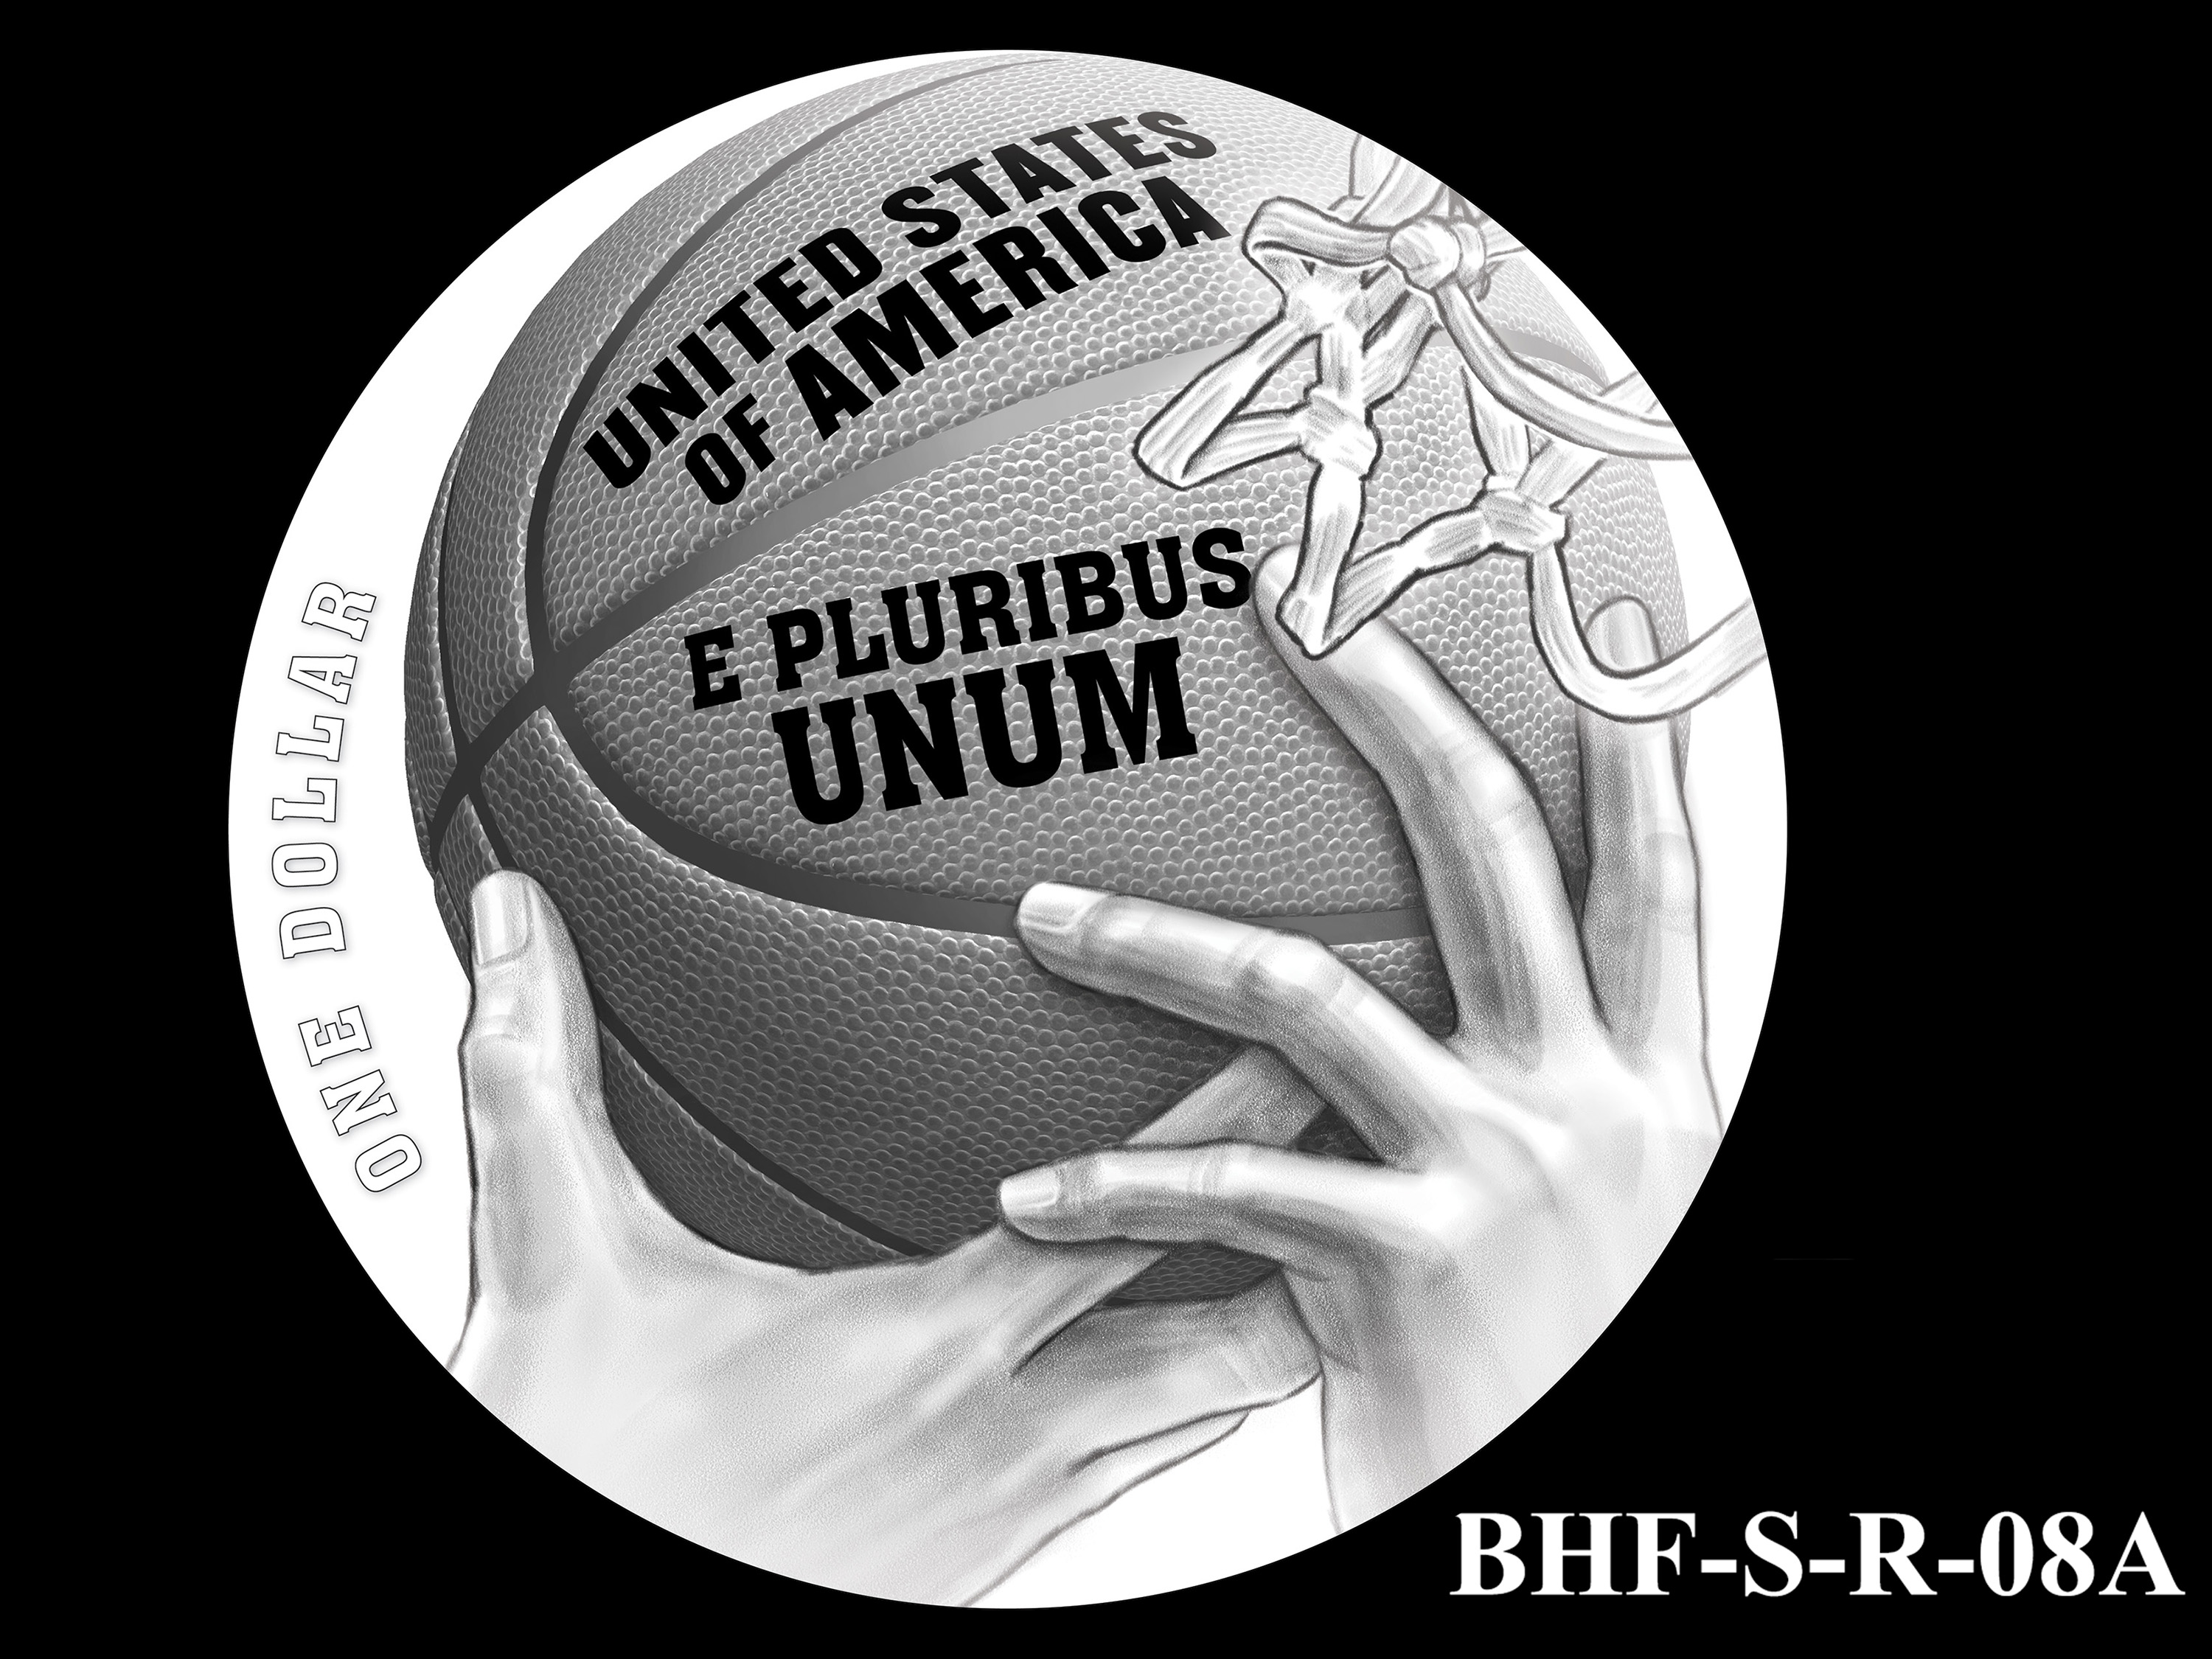 BHF-S-R-08A -- 2020 Basketball Hall of Fame Commemorative Coin Program - Silver Reverse